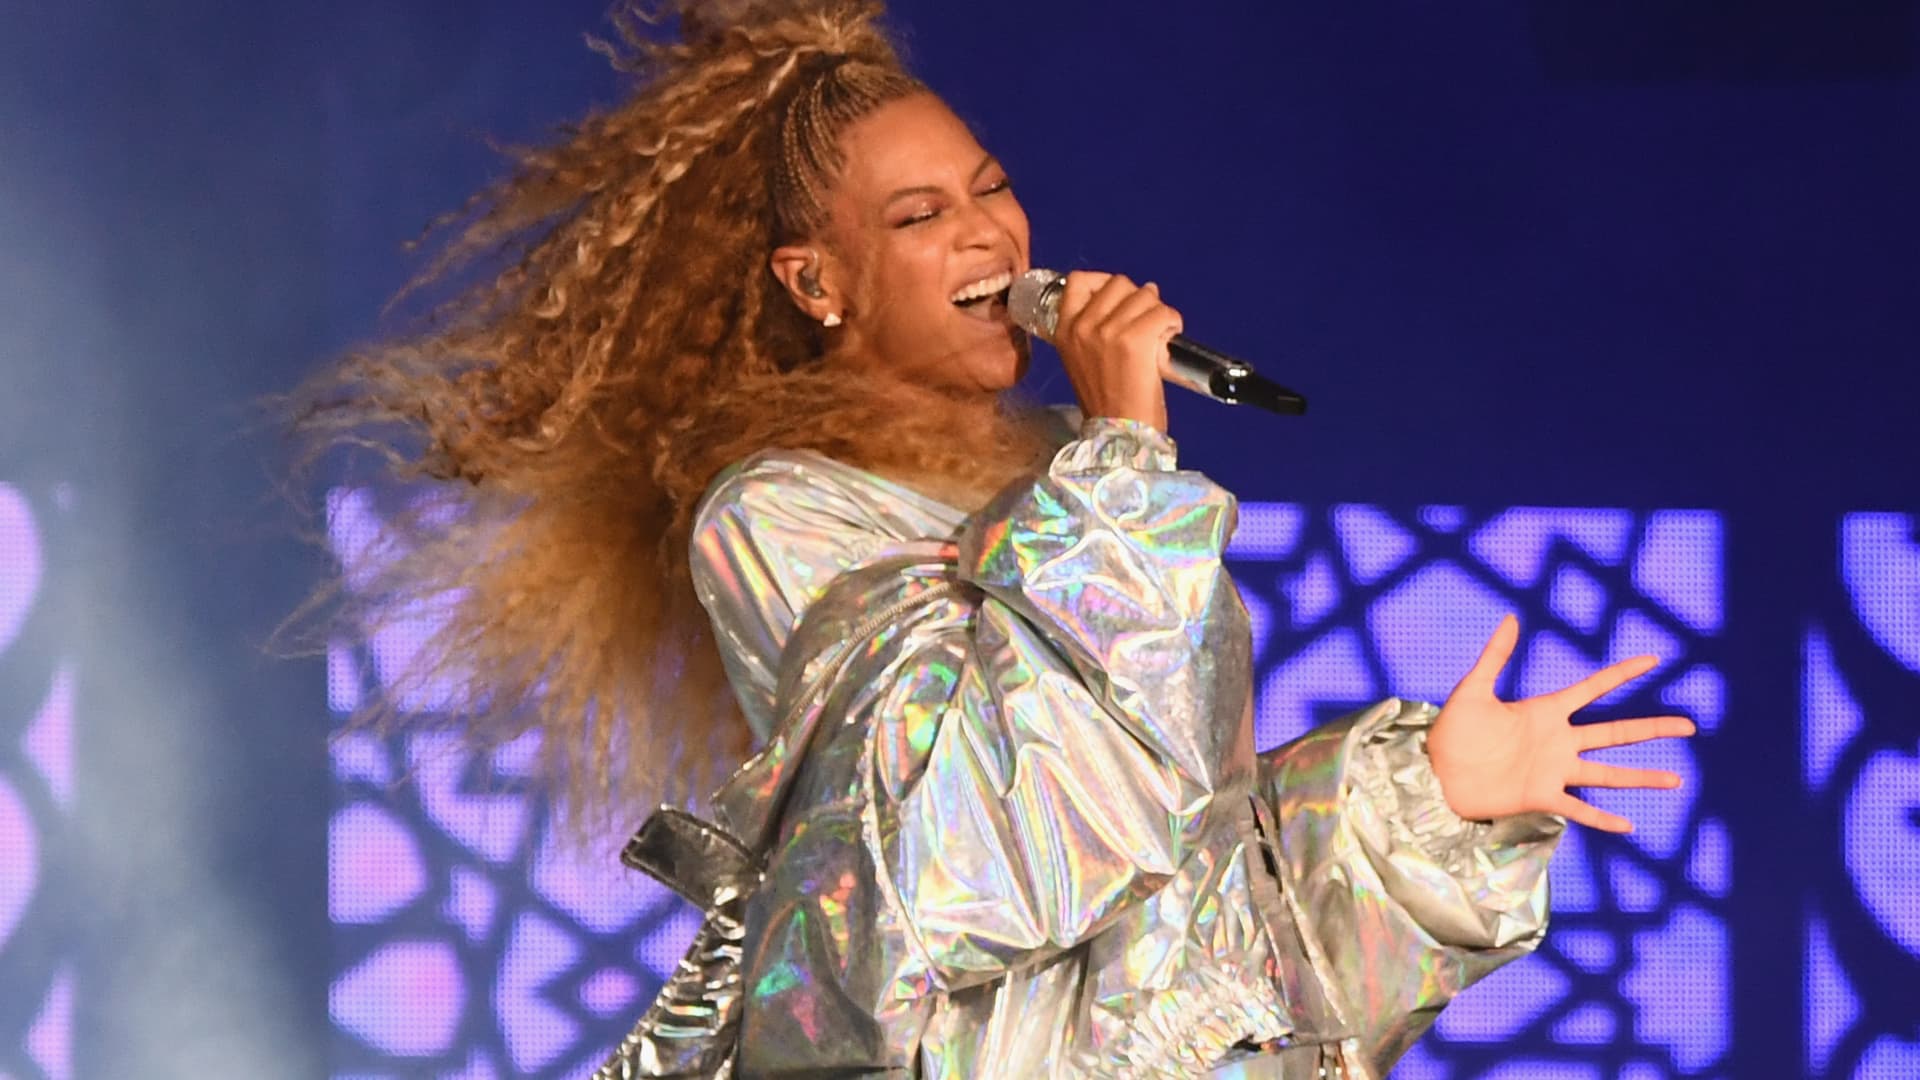 Beyoncé’s ‘Break My Soul’ is a sign the Great Resignation ‘has seeped into the zeitgeist’ says labor economist – CNBC